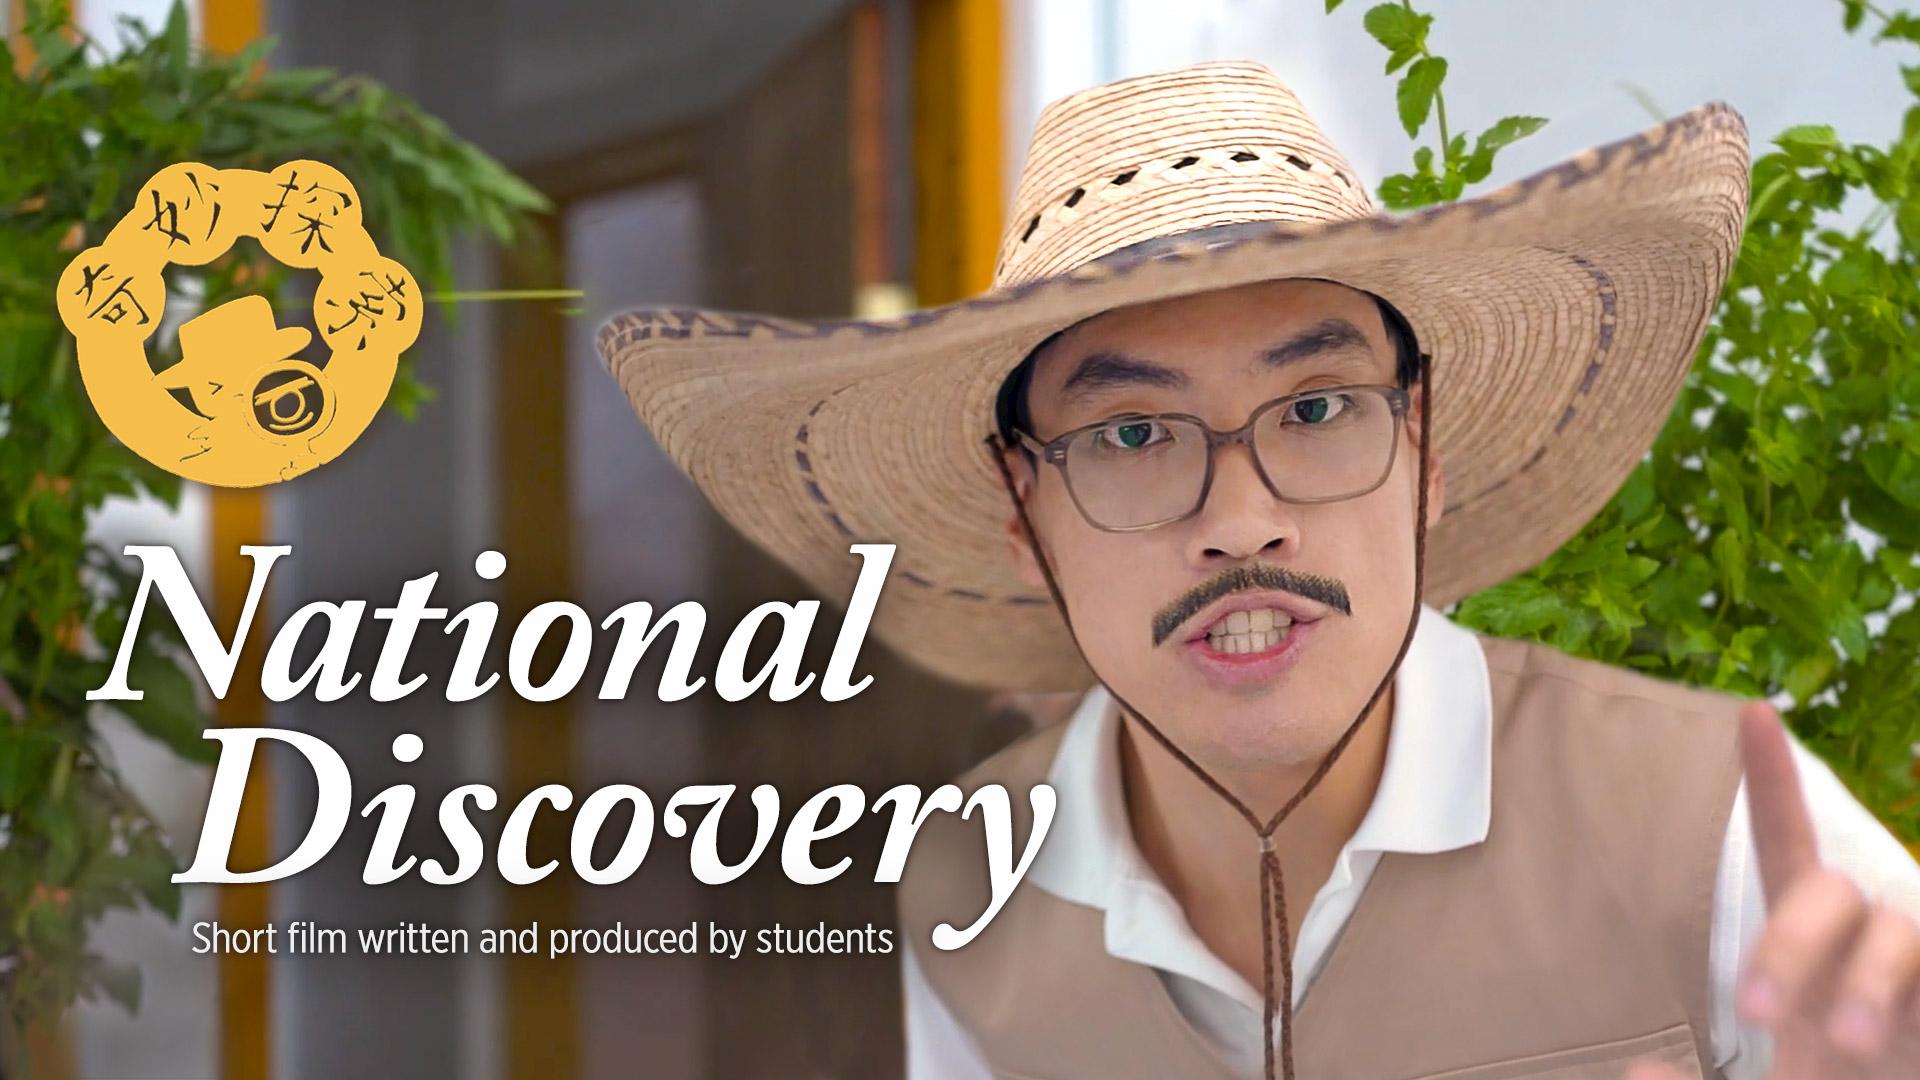 National Discovery